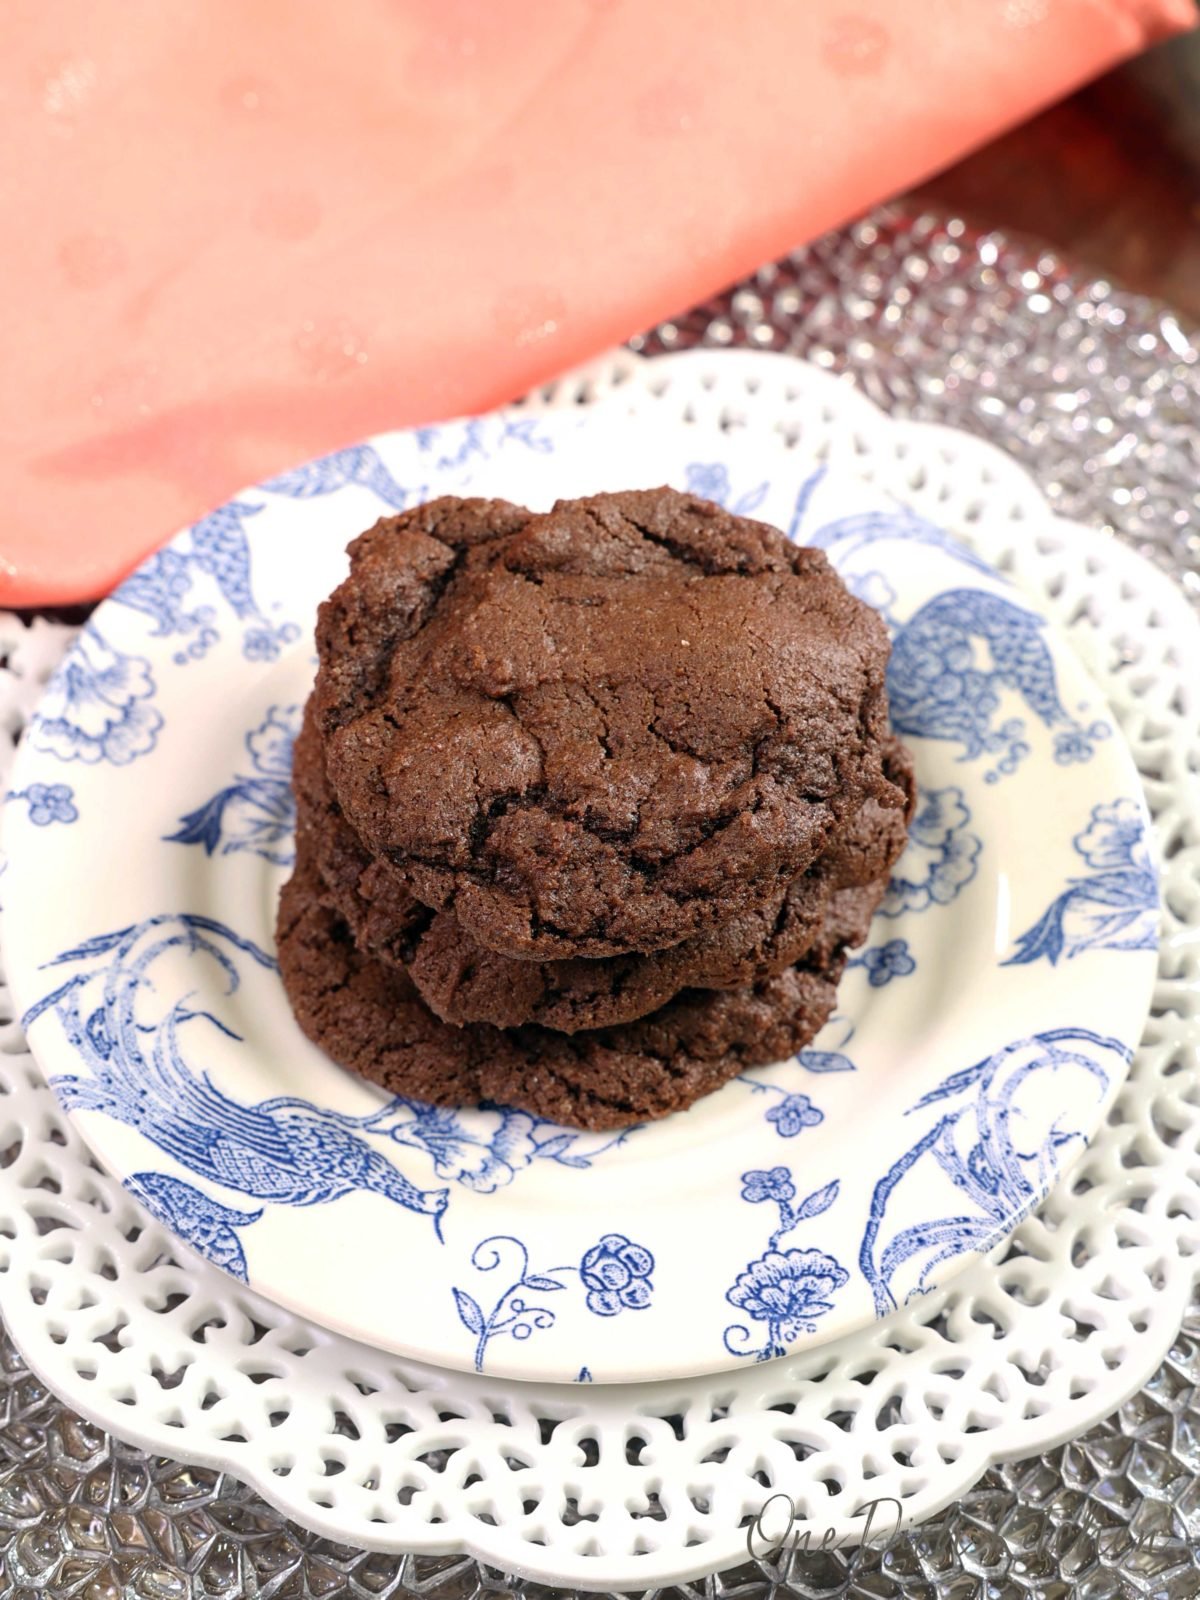 3 chocolate cookies stacked one on top of the other on a blue and white plate next to a peach colored napkin